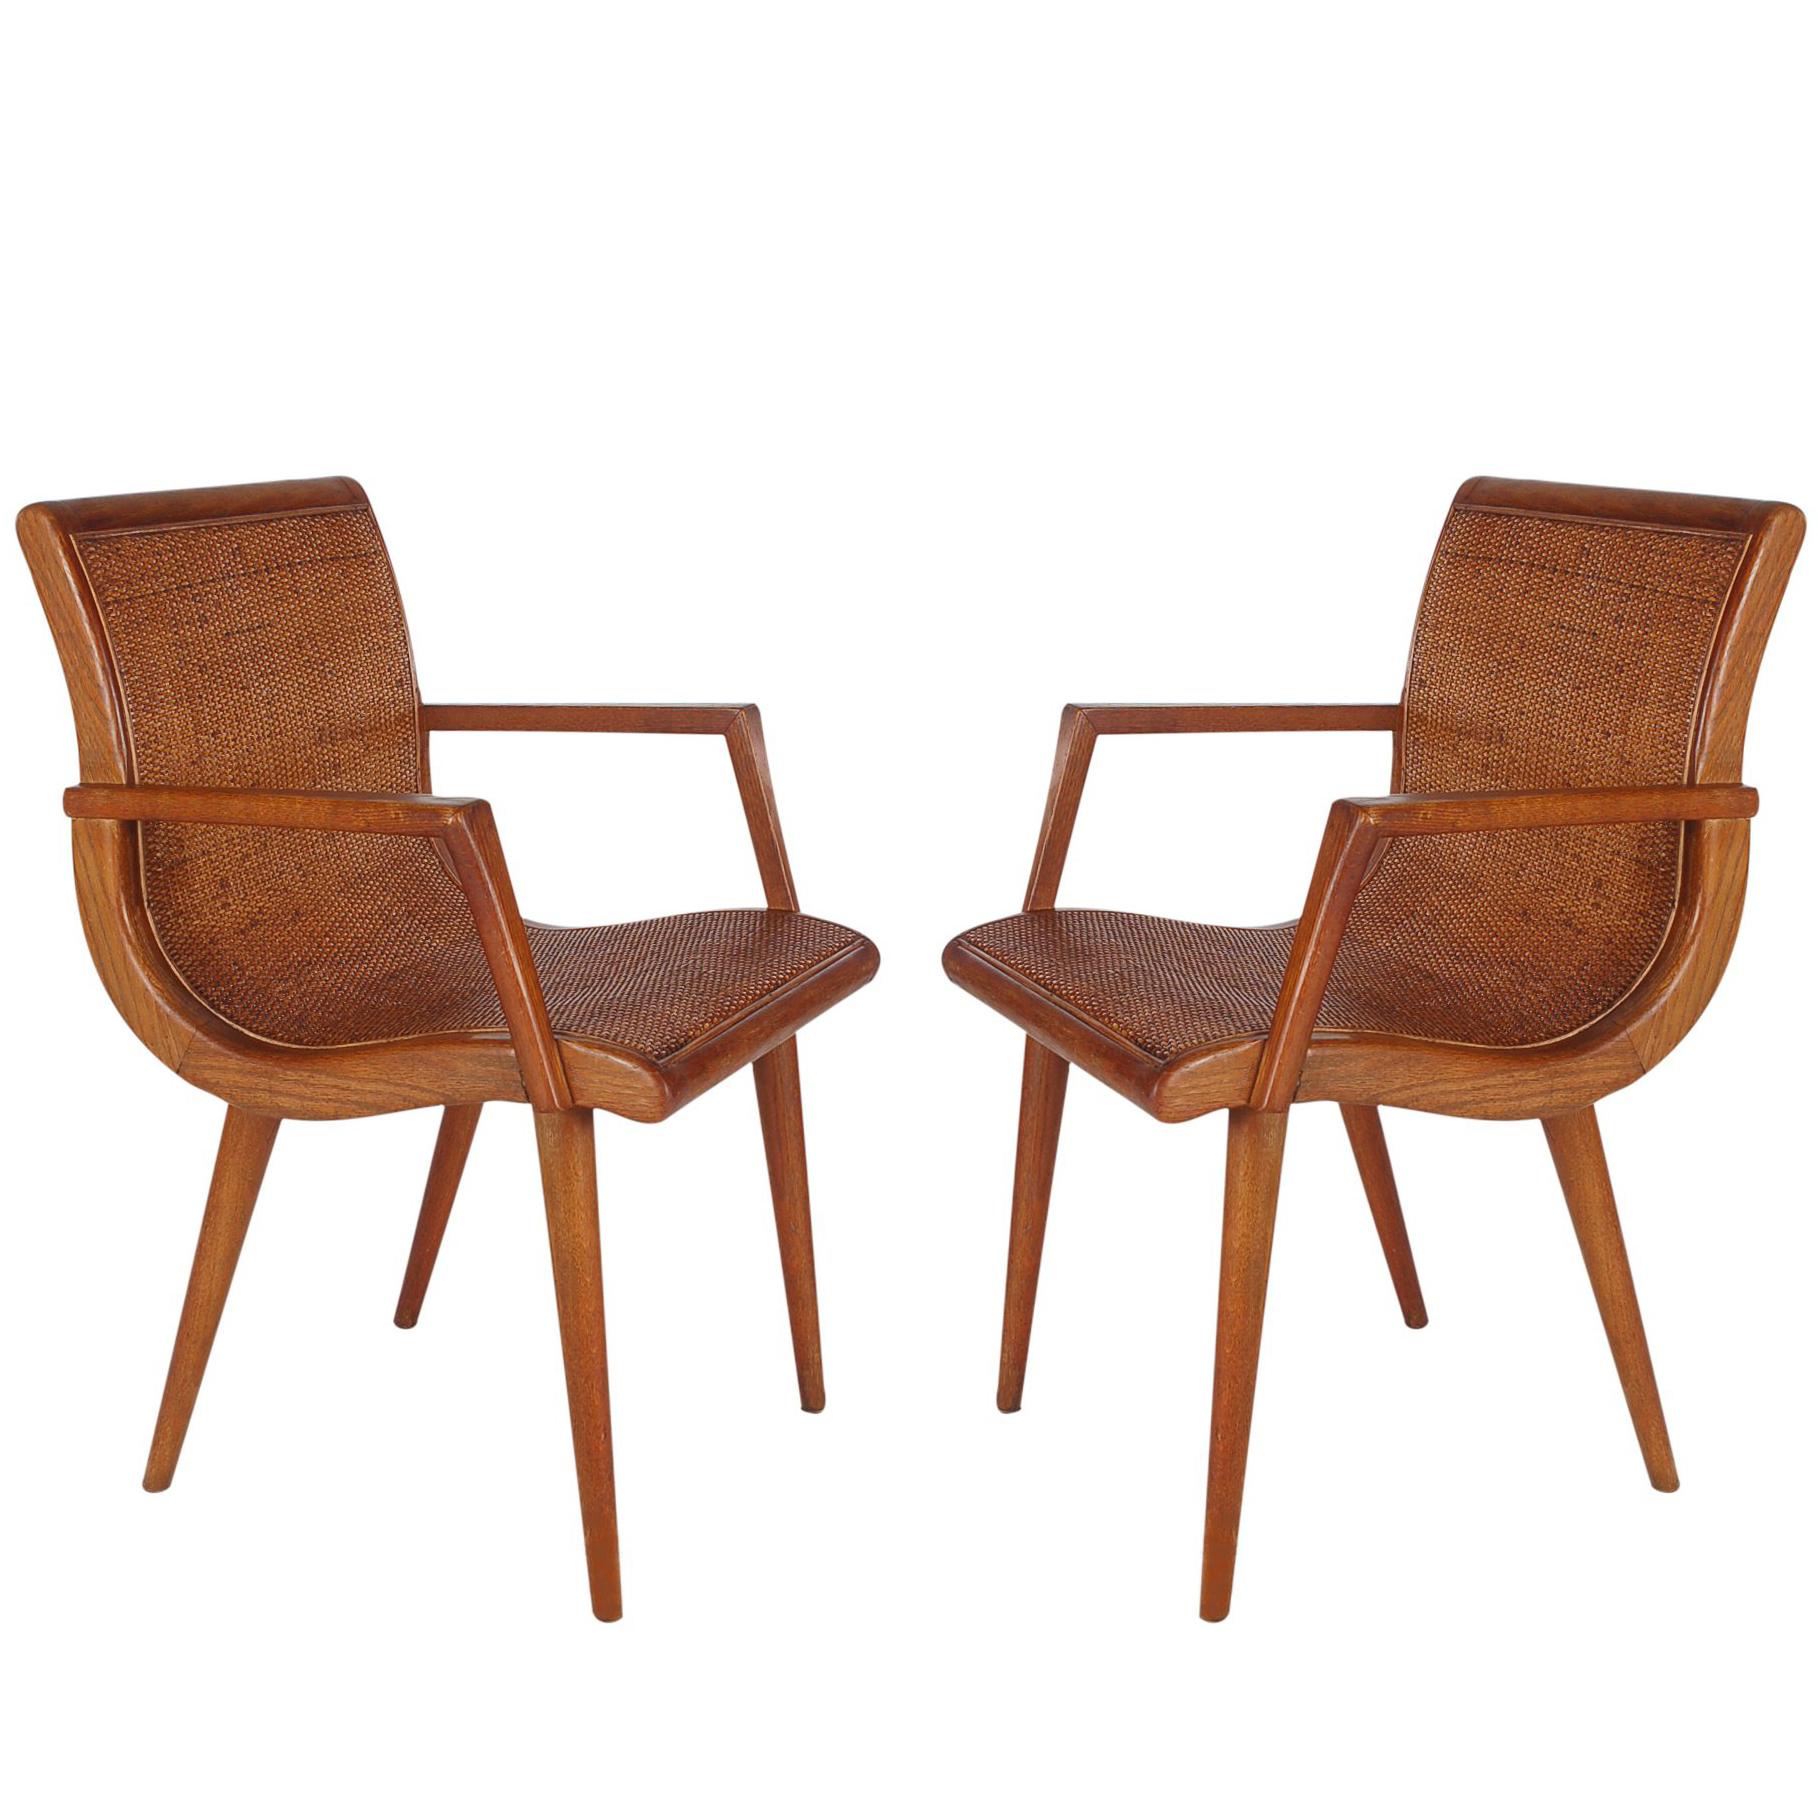 Pair of Mid-Century Modern Cane and Oak Danish Modern Style Armchairs